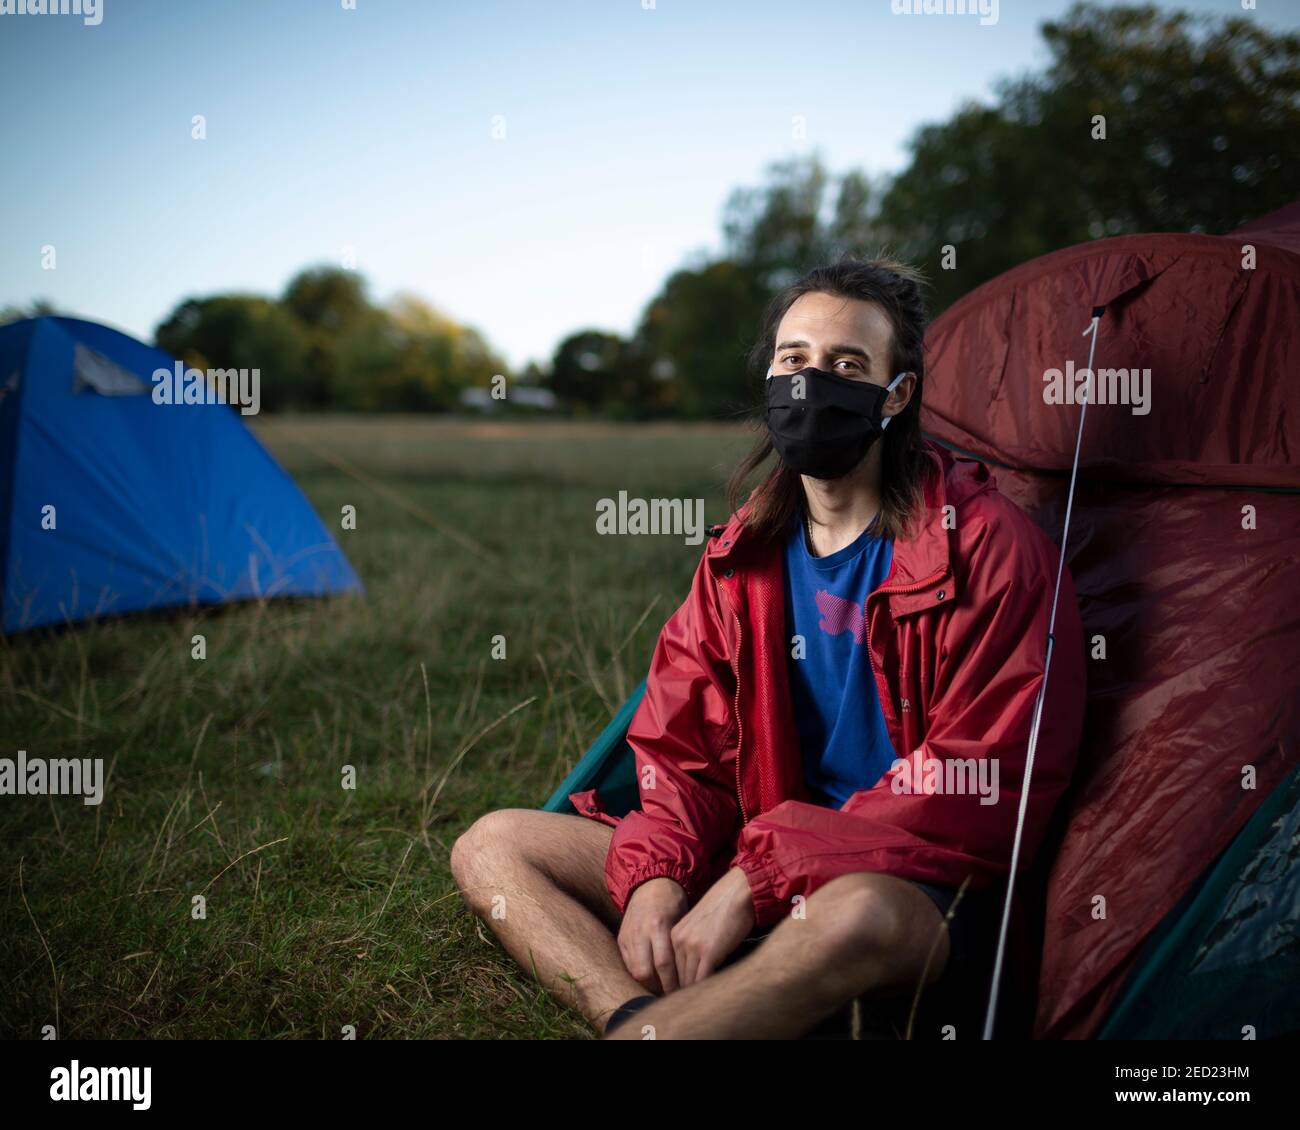 A male activist from Extinction Rebellion sits outside his tent at a campsite in Brockwell Park, London, 31 August 2020 Stock Photo